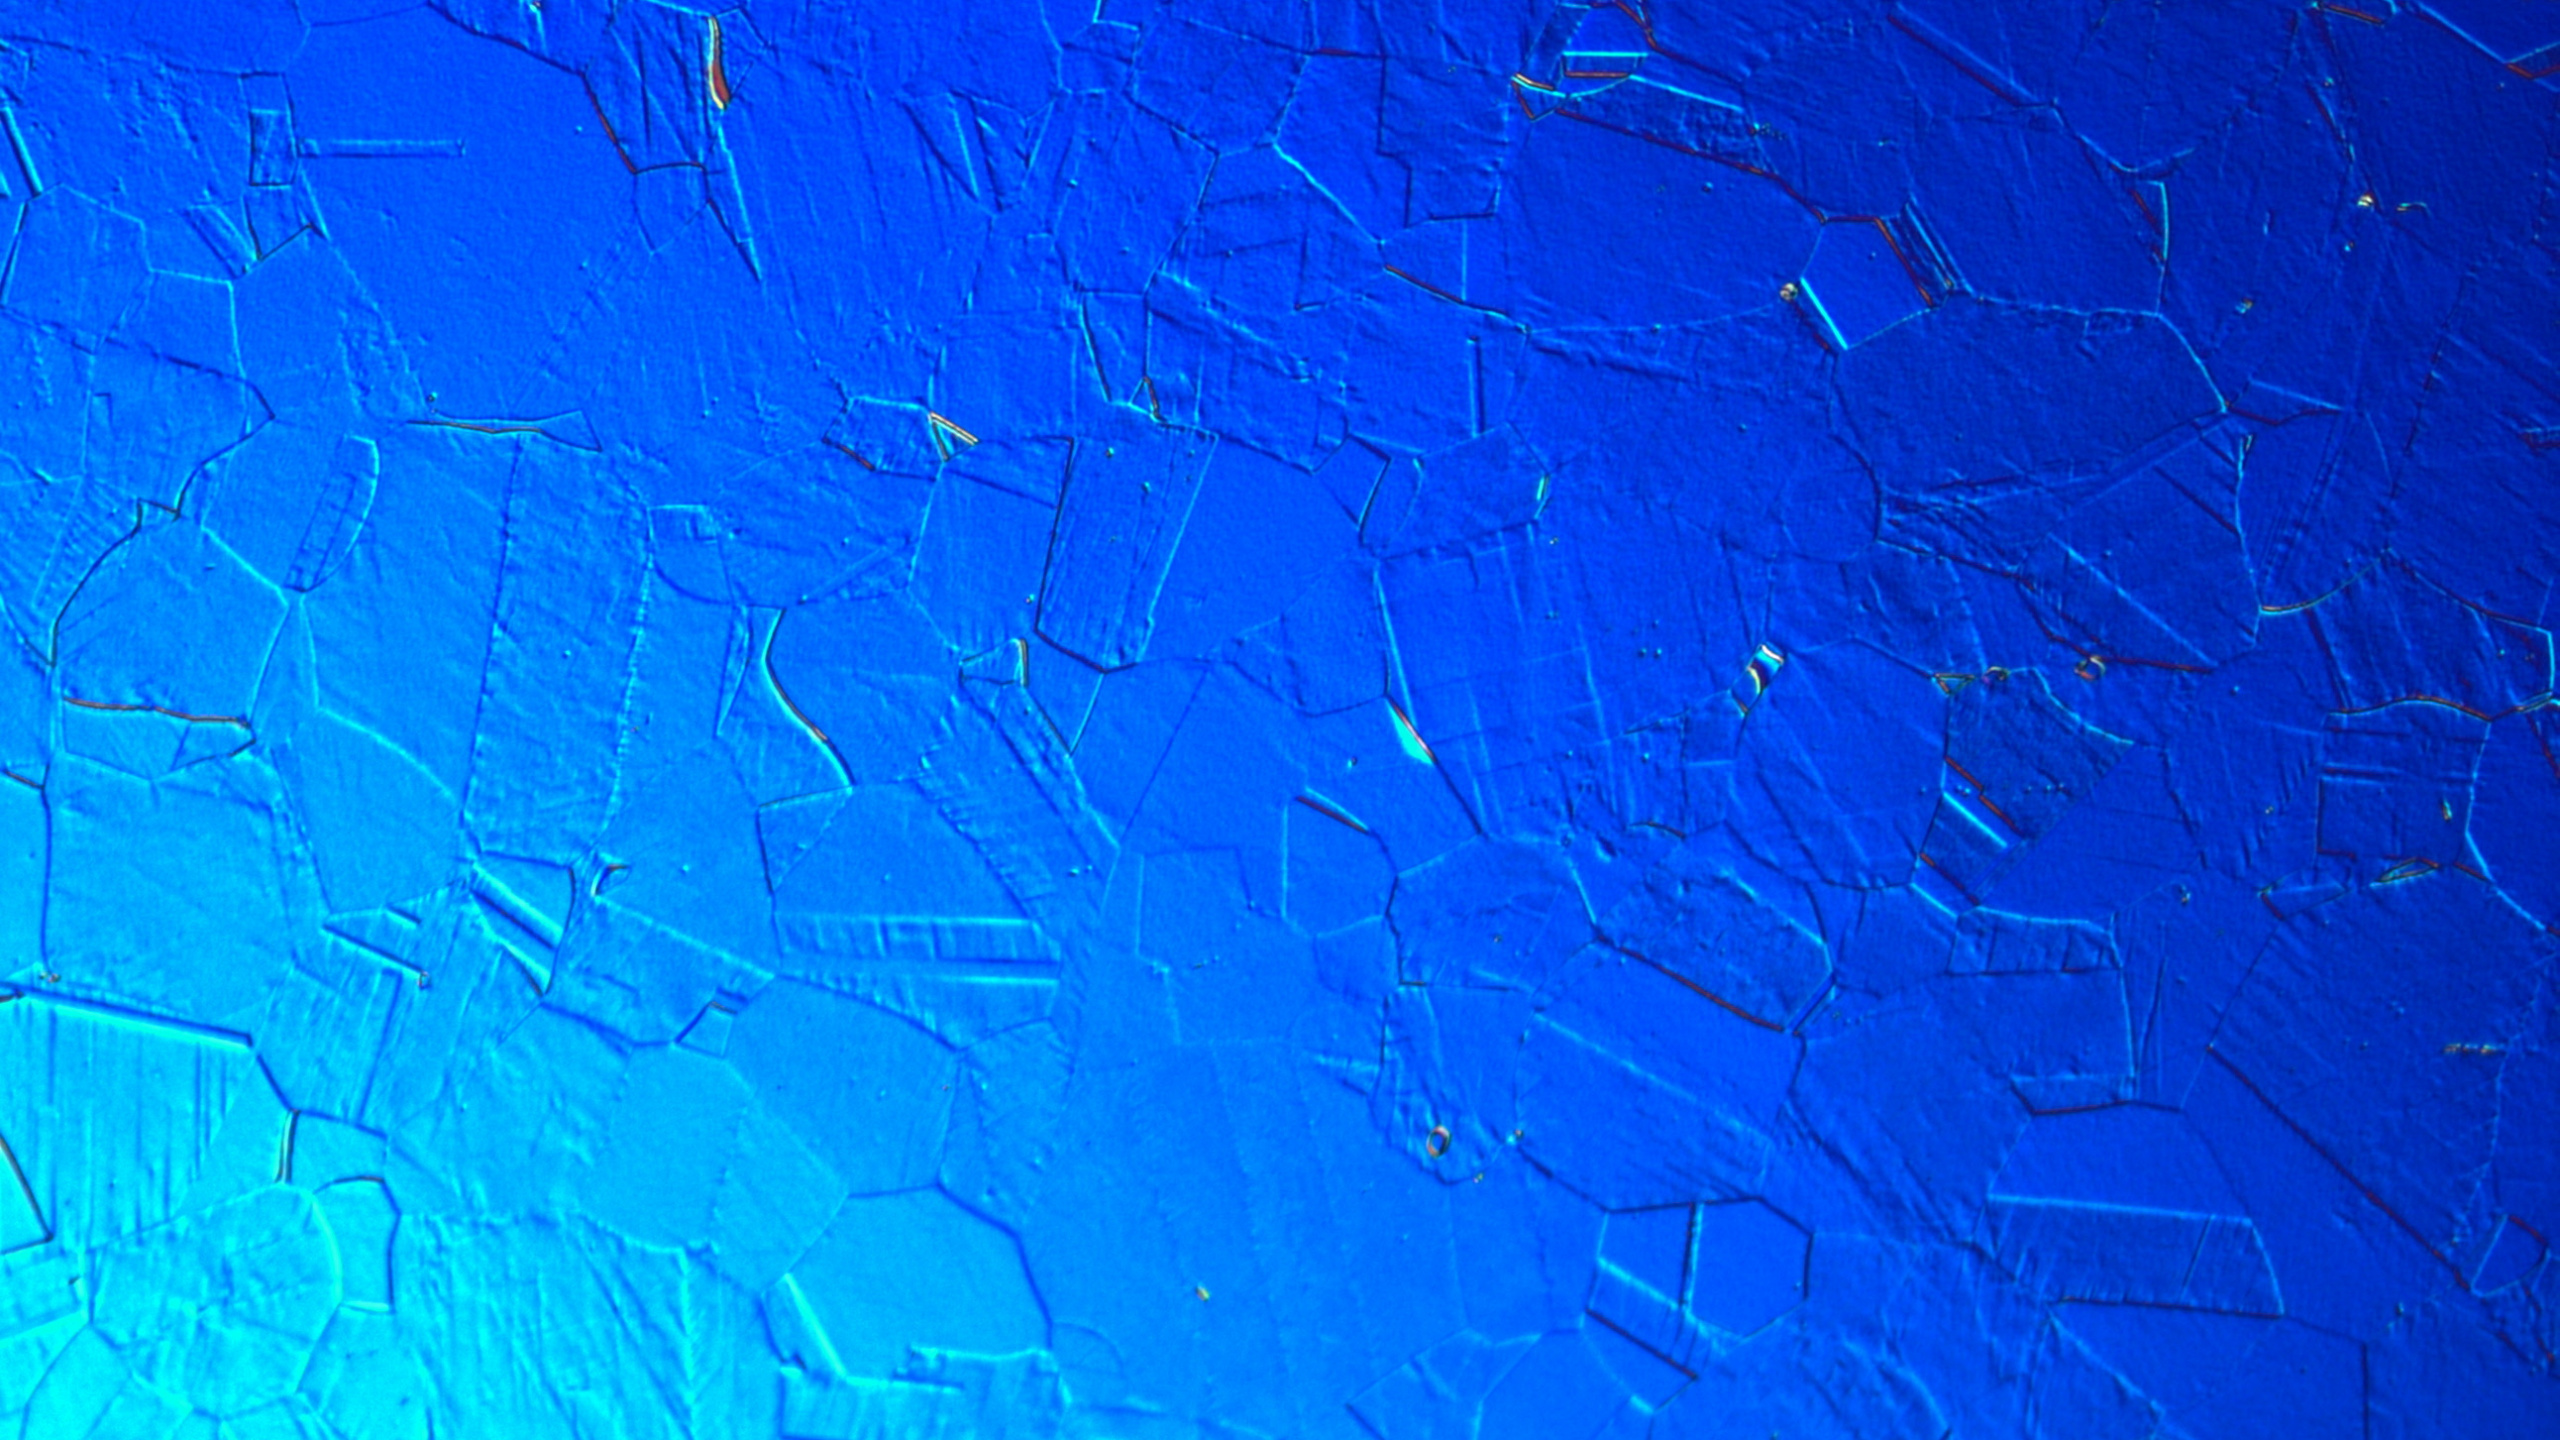 Blue and White Painted Wall. Wallpaper in 2560x1440 Resolution